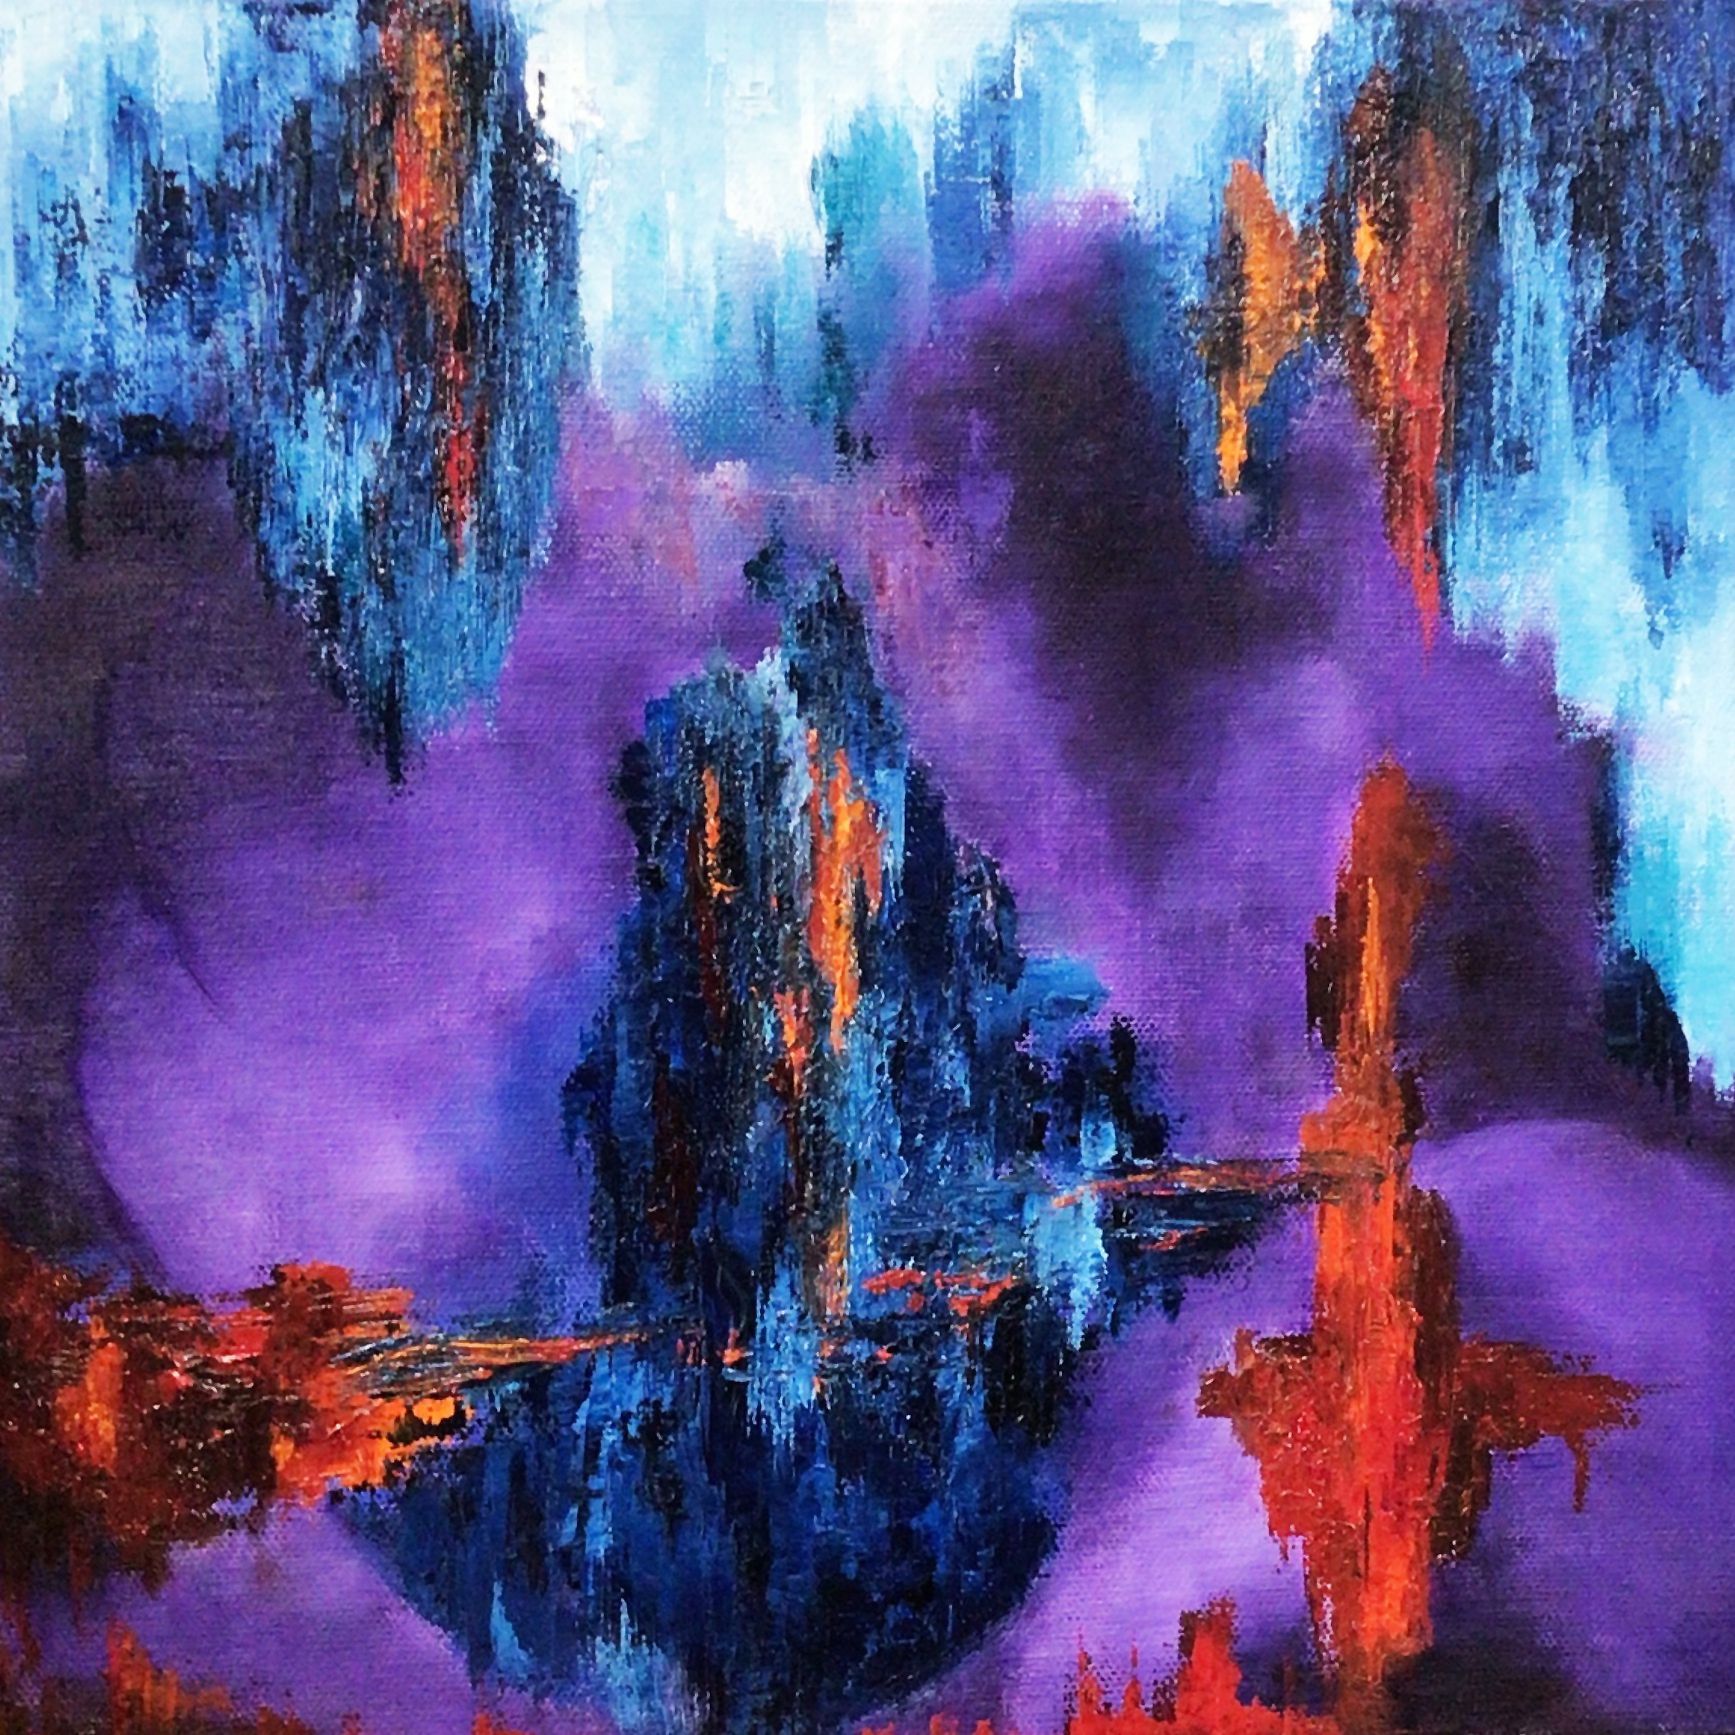 abstract view of two heads together in purples and blues